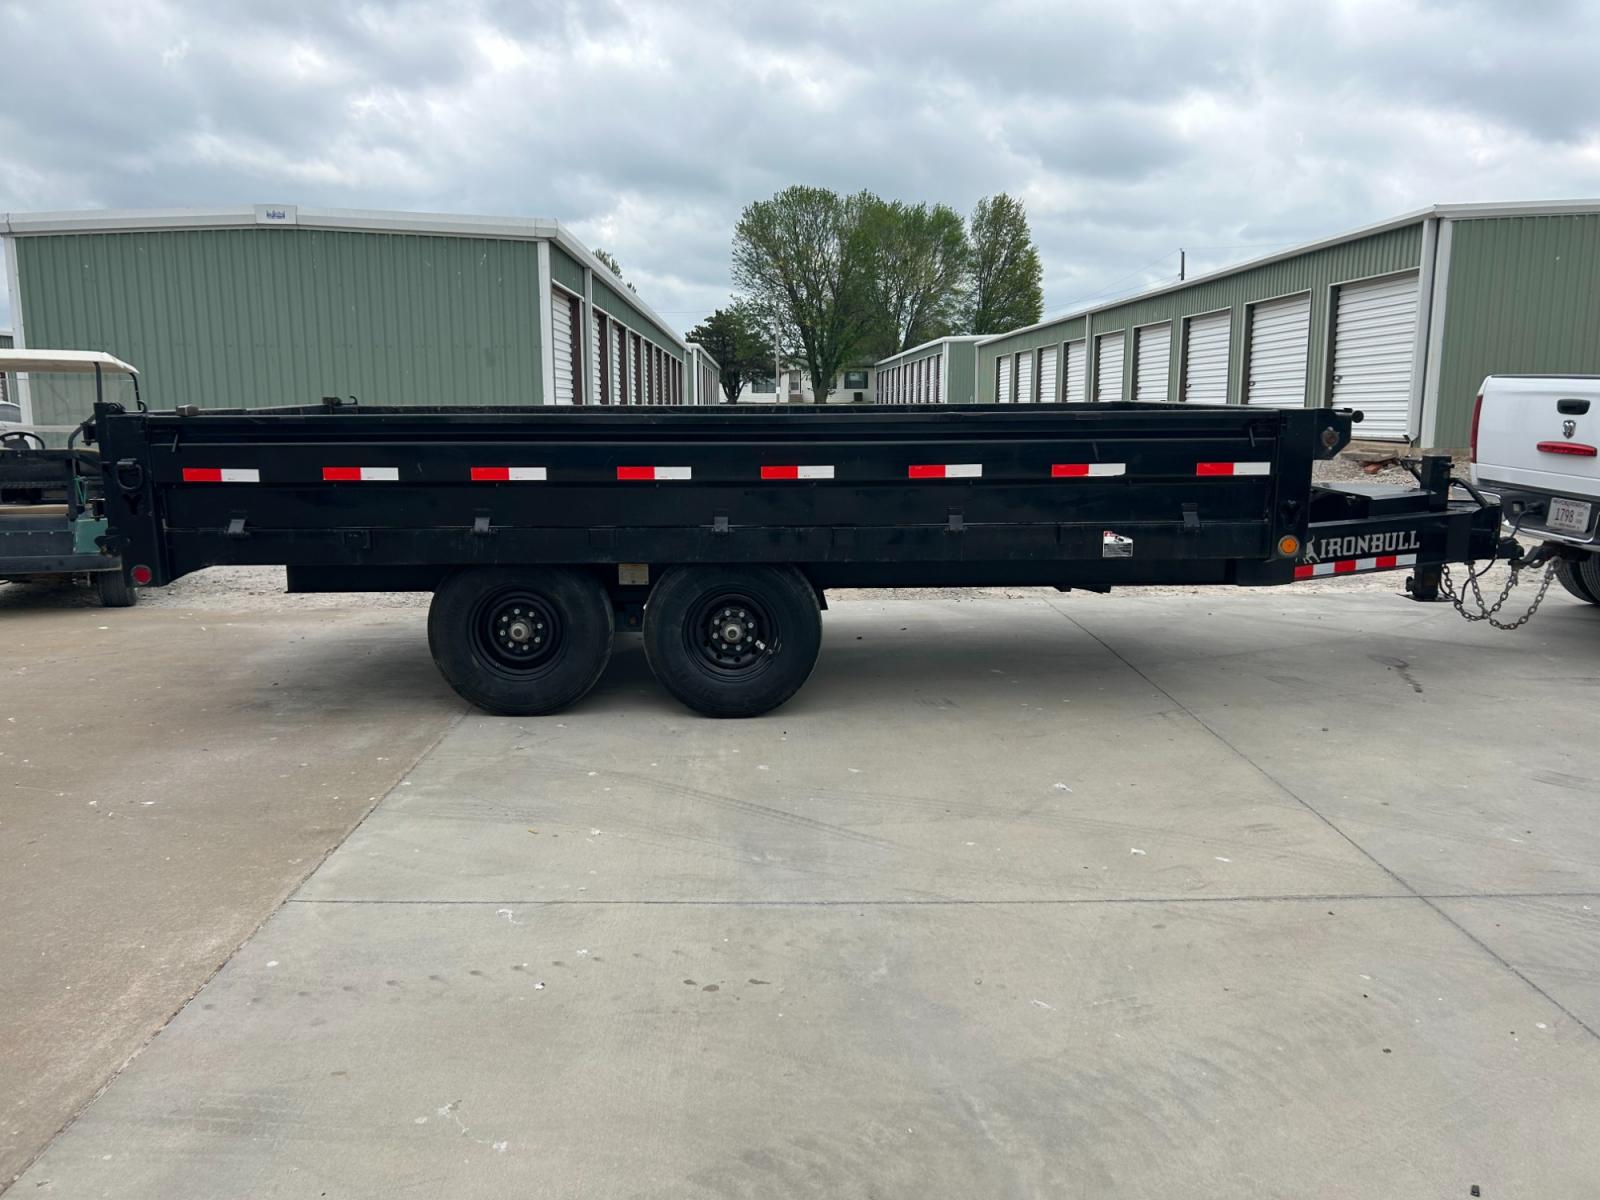 2022 BLACK IRONBULL DUMP TRAILER DUMPBED (50HDP1620N1) , located at 17760 Hwy 62, Morris, OK, 74445, 35.609104, -95.877060 - 2022 deckover dumps offer a raised deck (above the tires) to accommodate 10 gauge fold down sides and a bed width of 96”. The deckover is equipped standard with 10” I beam frame. 3” channel crossmembers span the 10 gauge smooth steel floor. 2 5/16” couplers are equipped standard on each mode - Photo #1